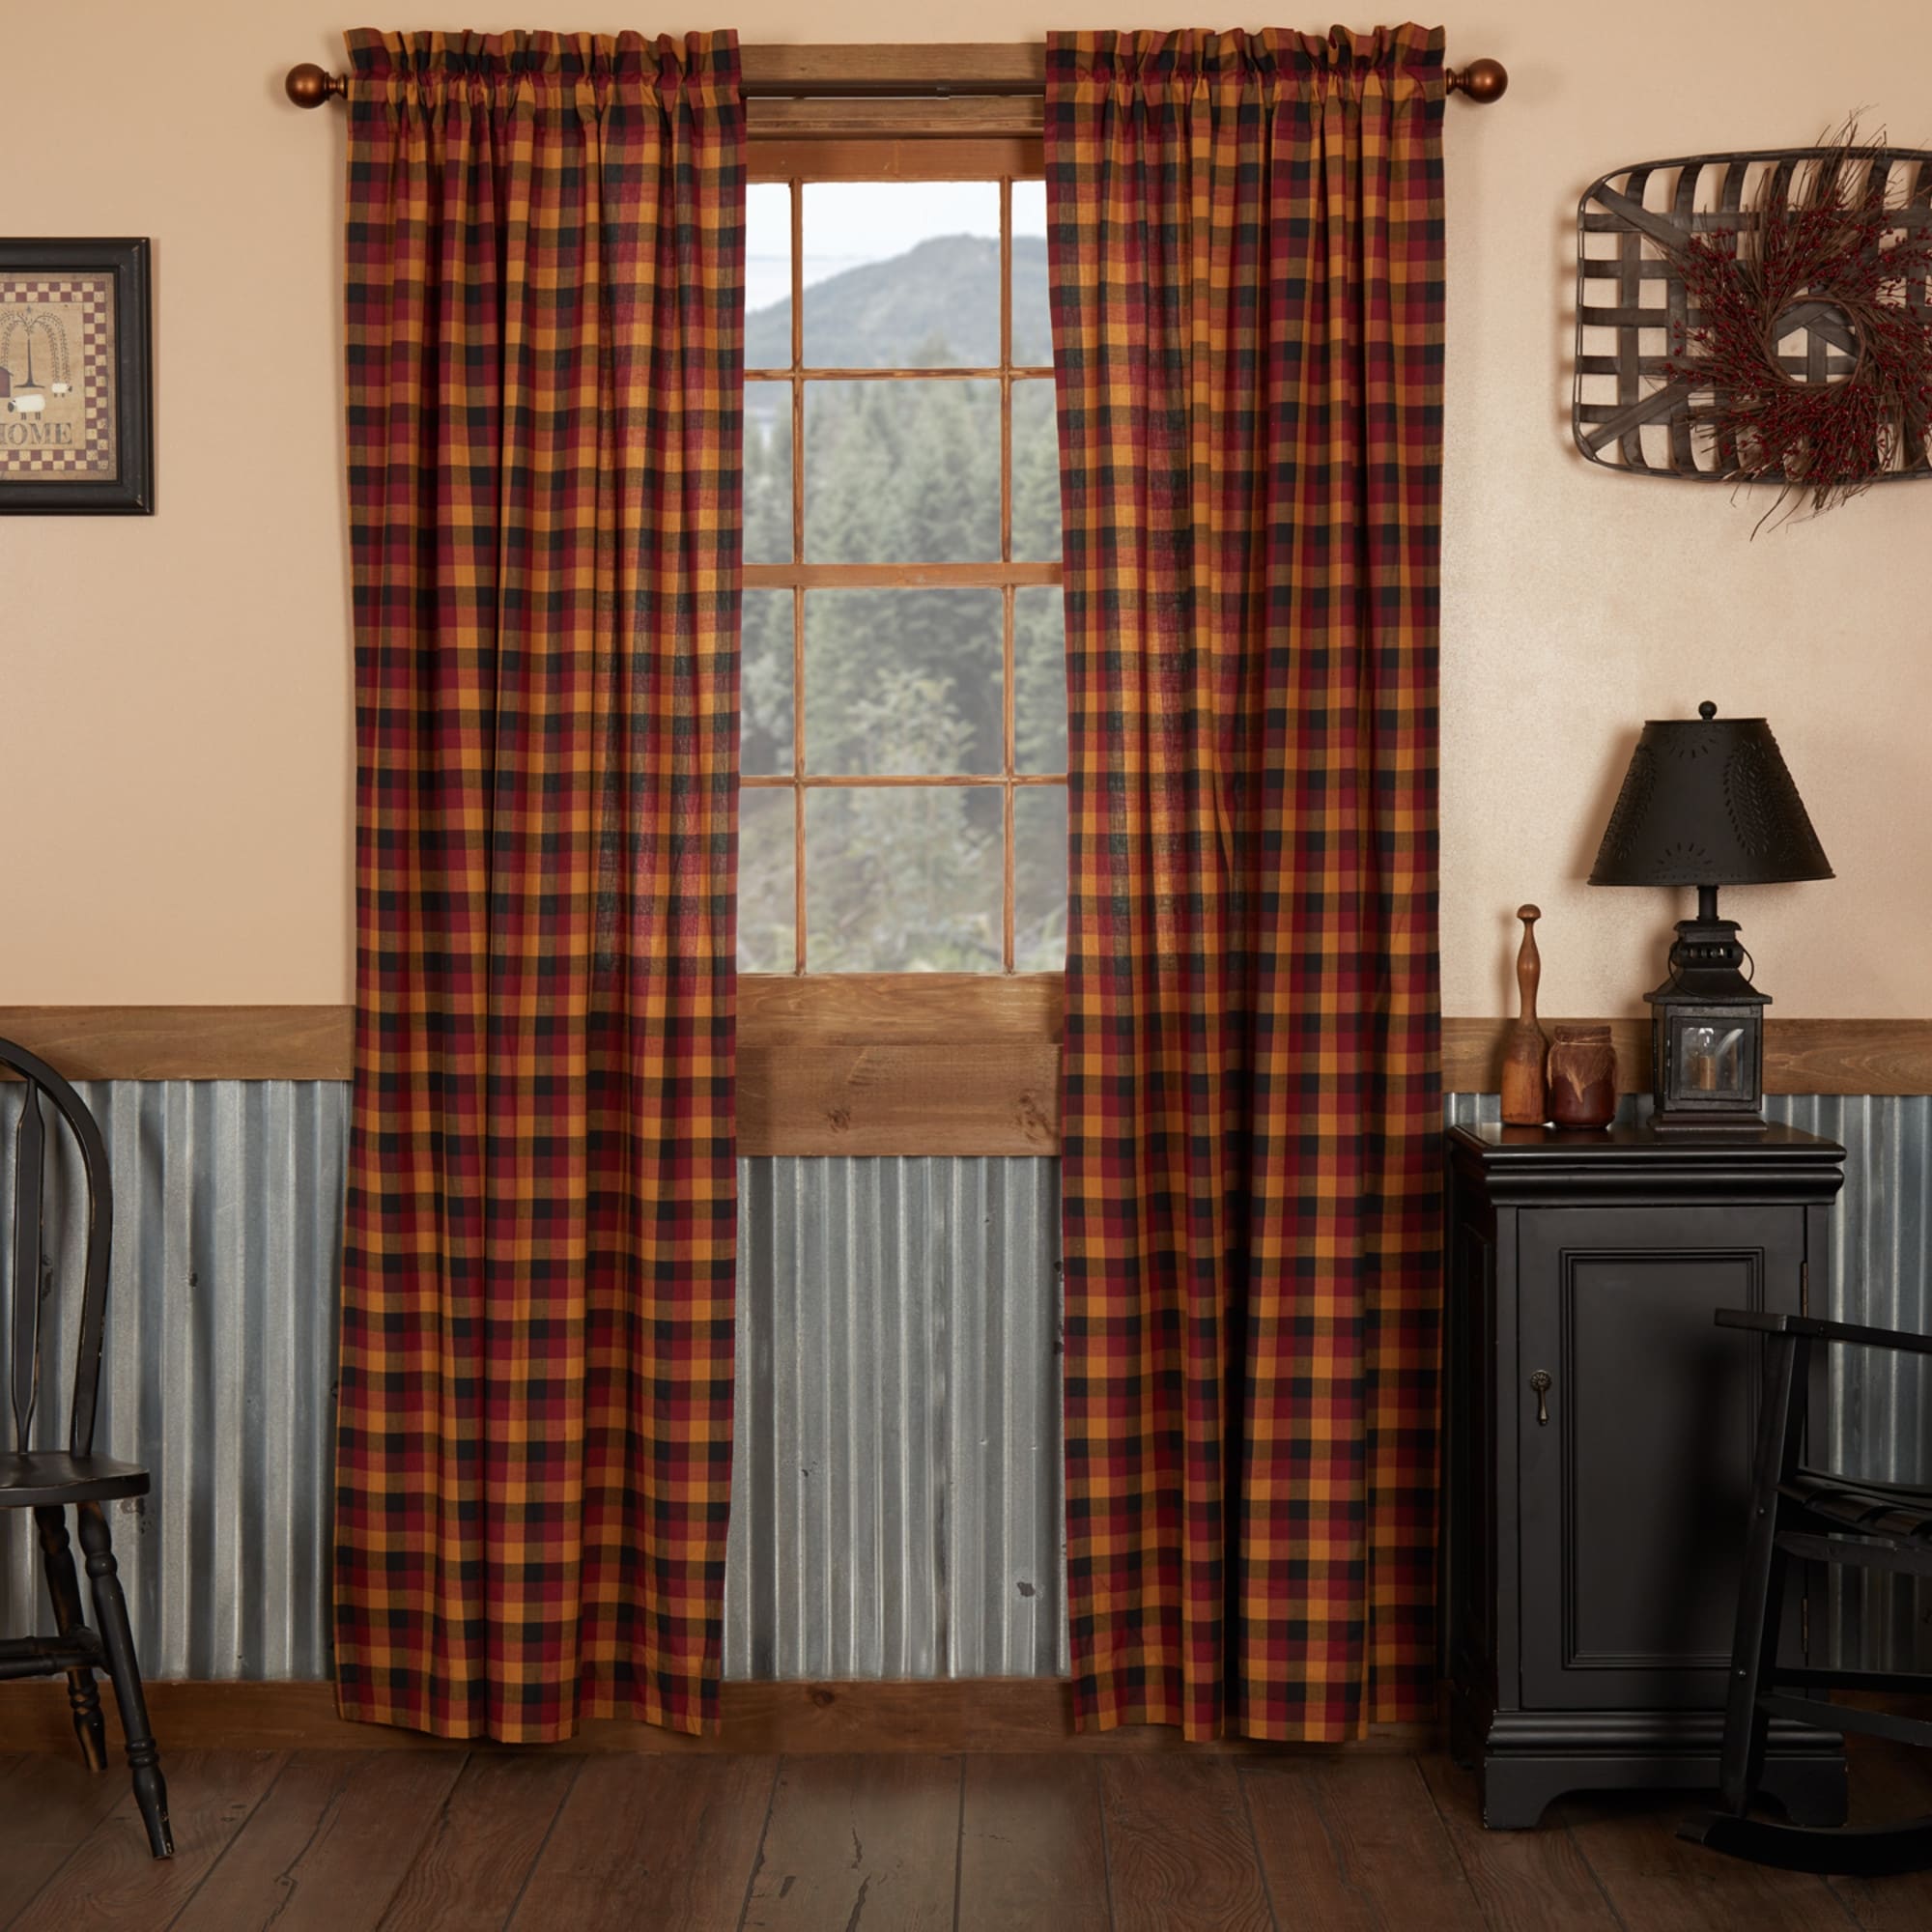 CROSSWOODS Panel Set Plaid Tan/Red Farmhouse Country Rustic Lined VHC 84x40 